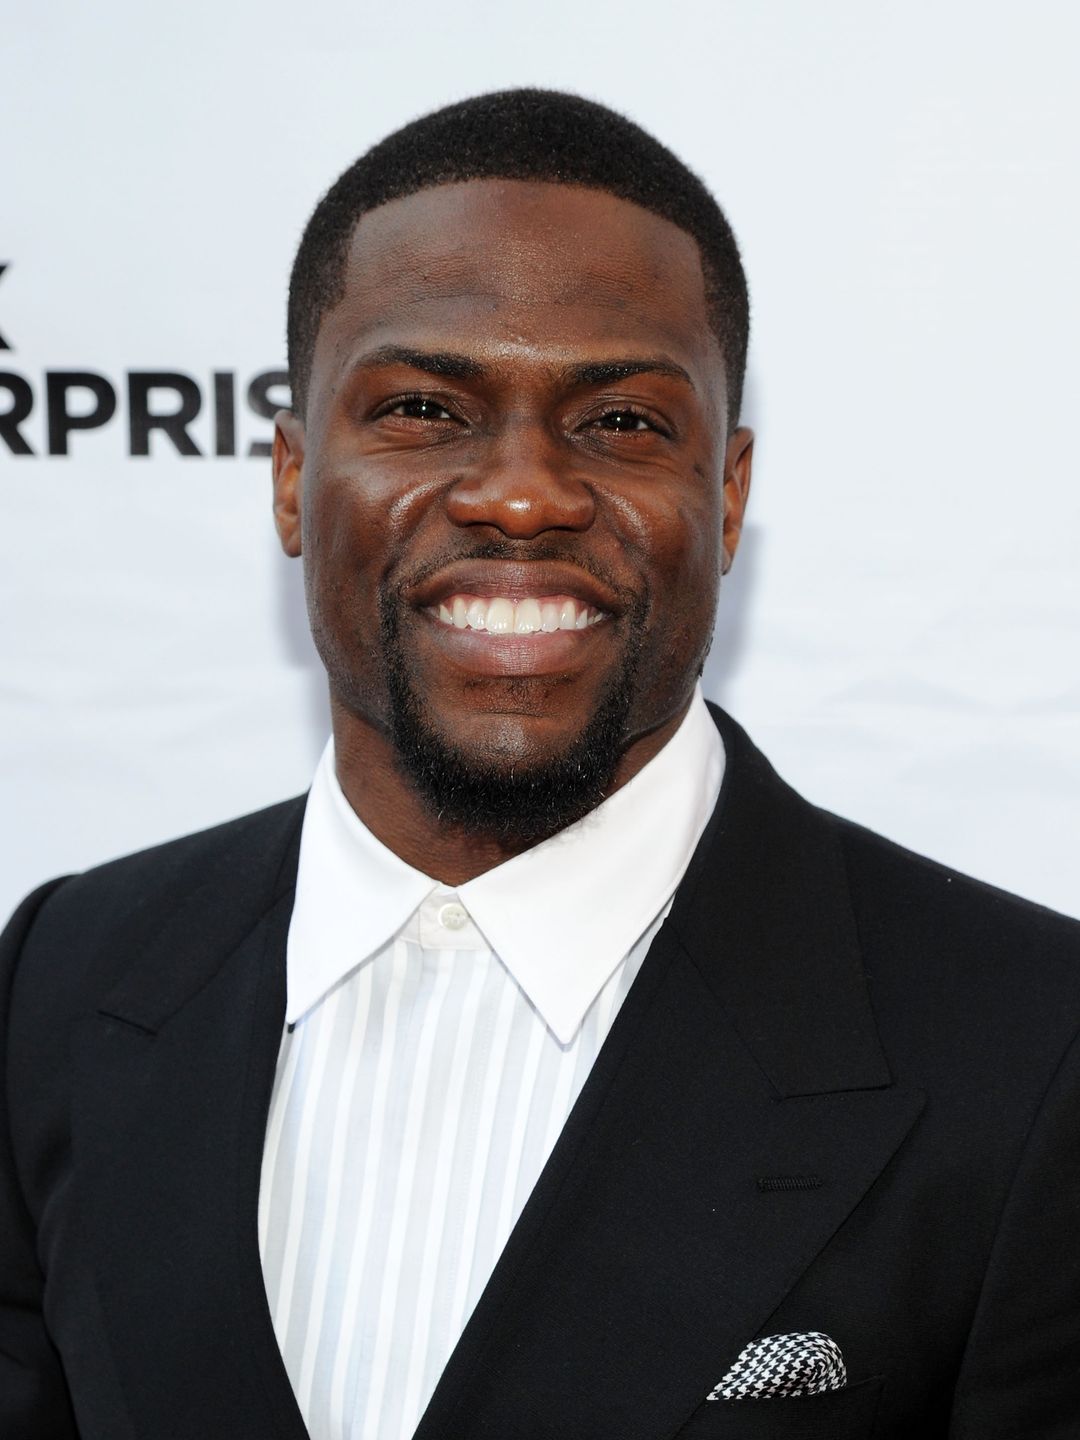 Kevin Hart early childhood